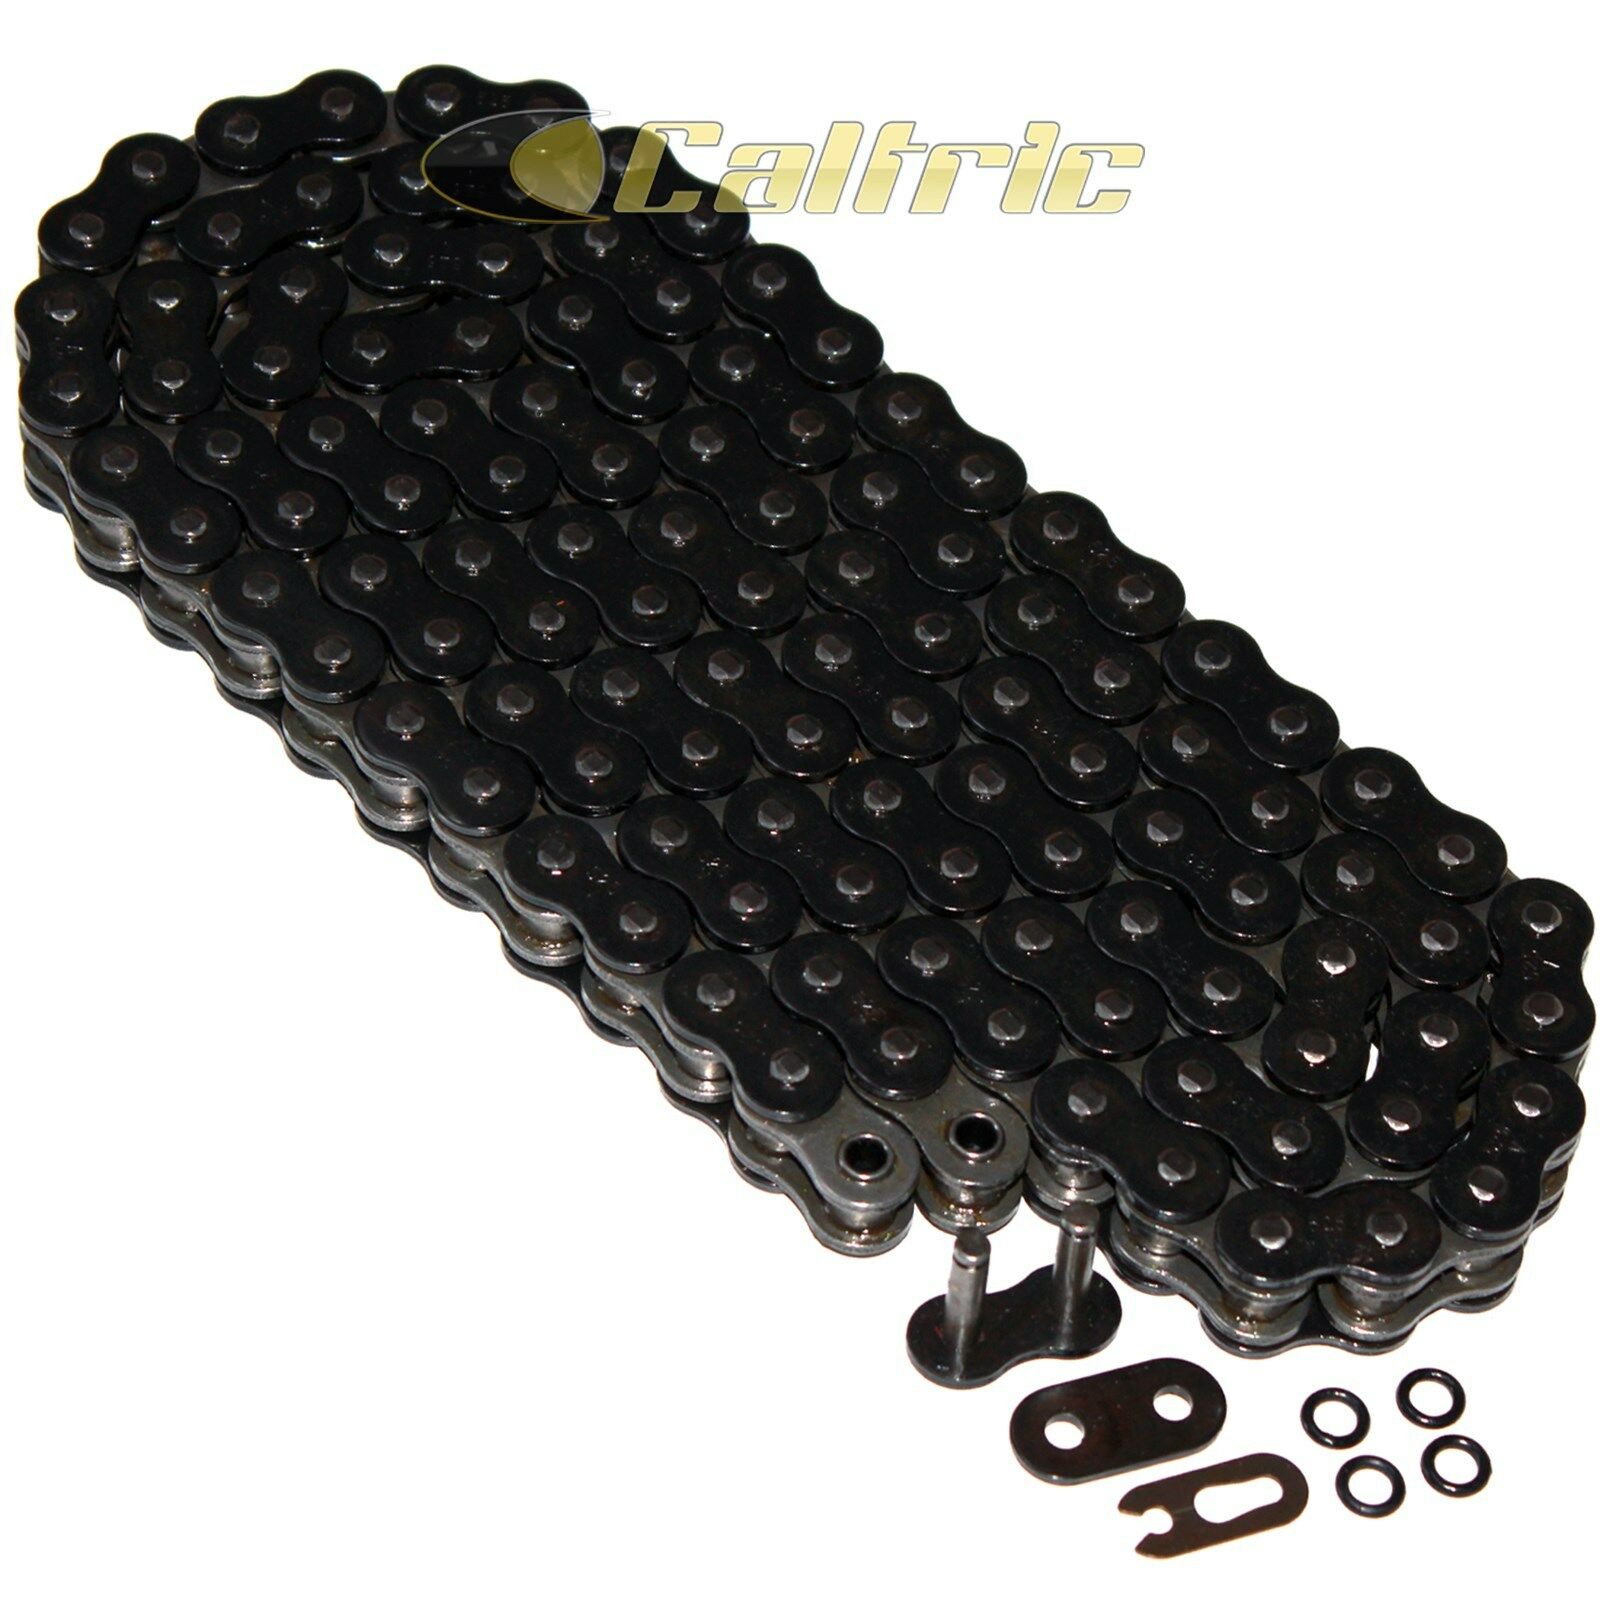 530 X 120 Links Motorcycle Atv Black O-ring Drive Chain 530-pitch 120-links